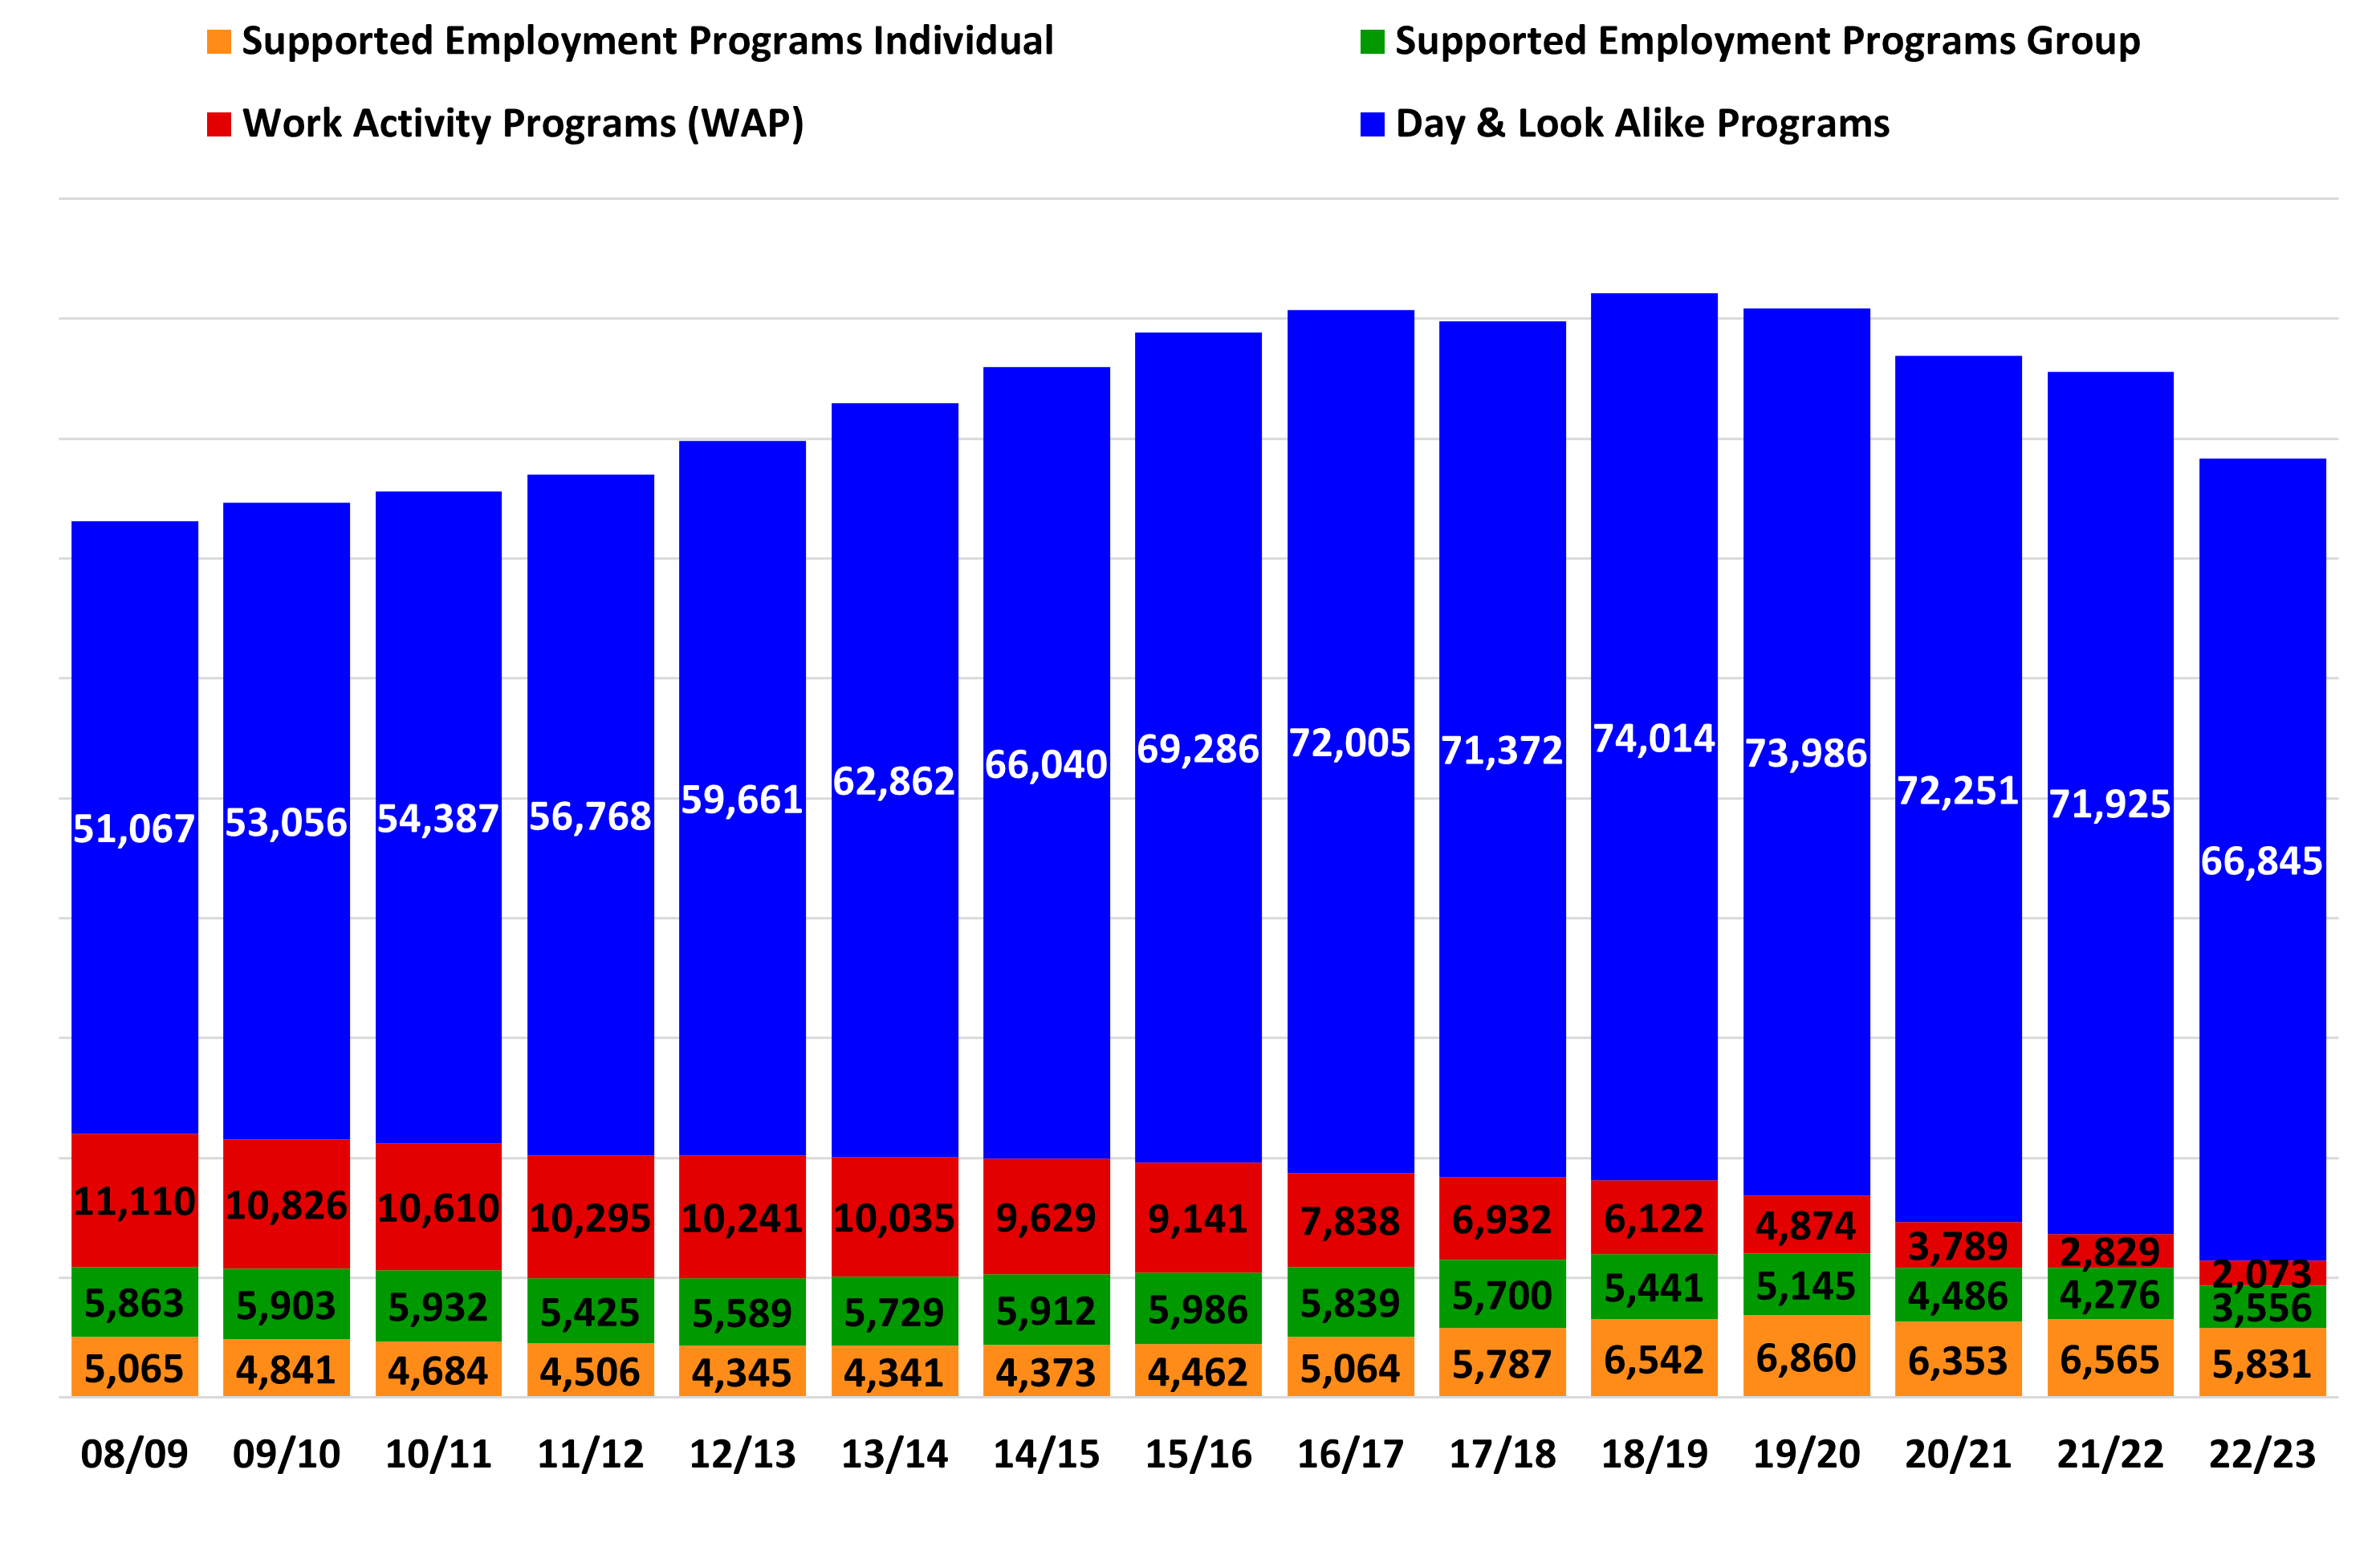 Bar graph showing how many people are in each service type. 2008-2009 Day and Look Alike programs: 51,067 Work Activity Programs (WAP): 11,110 Supported Employment Programs Group: 5,863 Supported Employment Programs Individual: 5,065 2009-2010 Day and Look Alike programs: 53,056 Work Activity Programs (WAP): 10,826 Supported Employment Programs Group: 5,903 Supported Employment Programs Individual: 4,841 2010-2011 Day and Look Alike programs: 54,387 Work Activity Programs (WAP): 10,610 Supported Employment Programs Group: 5,932 Supported Employment Programs Individual: 4,684 2011-2012 Day and Look Alike programs: 56,768 Work Activity Programs (WAP): 10,295 Supported Employment Programs Group: 5,425 Supported Employment Programs Individual: 4,506 2012-2013 Day and Look Alike programs: 59,661 Work Activity Programs (WAP): 10,241 Supported Employment Programs Group: 5,589 Supported Employment Programs Individual: 4,345 2013-2014 Day and Look Alike programs: 62,862 Work Activity Programs (WAP): 10,035 Supported Employment Programs Group: 5,729 Supported Employment Programs Individual: 4,341 2014-2015 Day and Look Alike programs: 66,040 Work Activity Programs (WAP): 9,629 Supported Employment Programs Group: 5,912 Supported Employment Programs Individual: 4,373 2015-2016 Day and Look Alike programs: 69,286 Work Activity Programs (WAP): 9,141 Supported Employment Programs Group: 5,986 Supported Employment Programs Individual: 4,462 2016-2017 Day and Look Alike programs: 72,005 Work Activity Programs (WAP): 7,838 Supported Employment Programs Group: 5,839 Supported Employment Programs Individual: 5,064 2017-2018 Day and Look Alike Programs: 71,372 Work Activity Programs (WAP): 6,932 Supported Employment Programs Group: 5,700 Supported Employment Programs Individual: 5,787 2018-2019 Day and Look Alike Programs: 74,014 Work Activity Programs (WAP): 6,122 Supported Employment Programs Group: 5,441 Supported Employment Programs Individual: 6,542 2019-2020 Day and Look Alike Programs: 73,986 Work Activity Programs (WAP): 4,874 Supported Employment Programs Group: 5,145 Supported Employment Programs Individual: 6,860 2020-2021 Day and Look Alike Programs: 72,251 Work Activity Programs (WAP): 3,789 Supported Employment Programs Group: 4,486 Supported Employment Programs Individual: 6,353 2021-2022 Day and Look Alike Programs: 71,925 Work Activity Programs (WAP): 2,829 Supported Employment Programs Group: 4,276 Supported Employment Programs Individual: 6,656 2022-2023 Day and Look Alike Programs: 66,845 Work Activity Programs (WAP): 2.073 Supported Employment Programs Group: 3,556 Supported Employment Programs Individual 5,831 